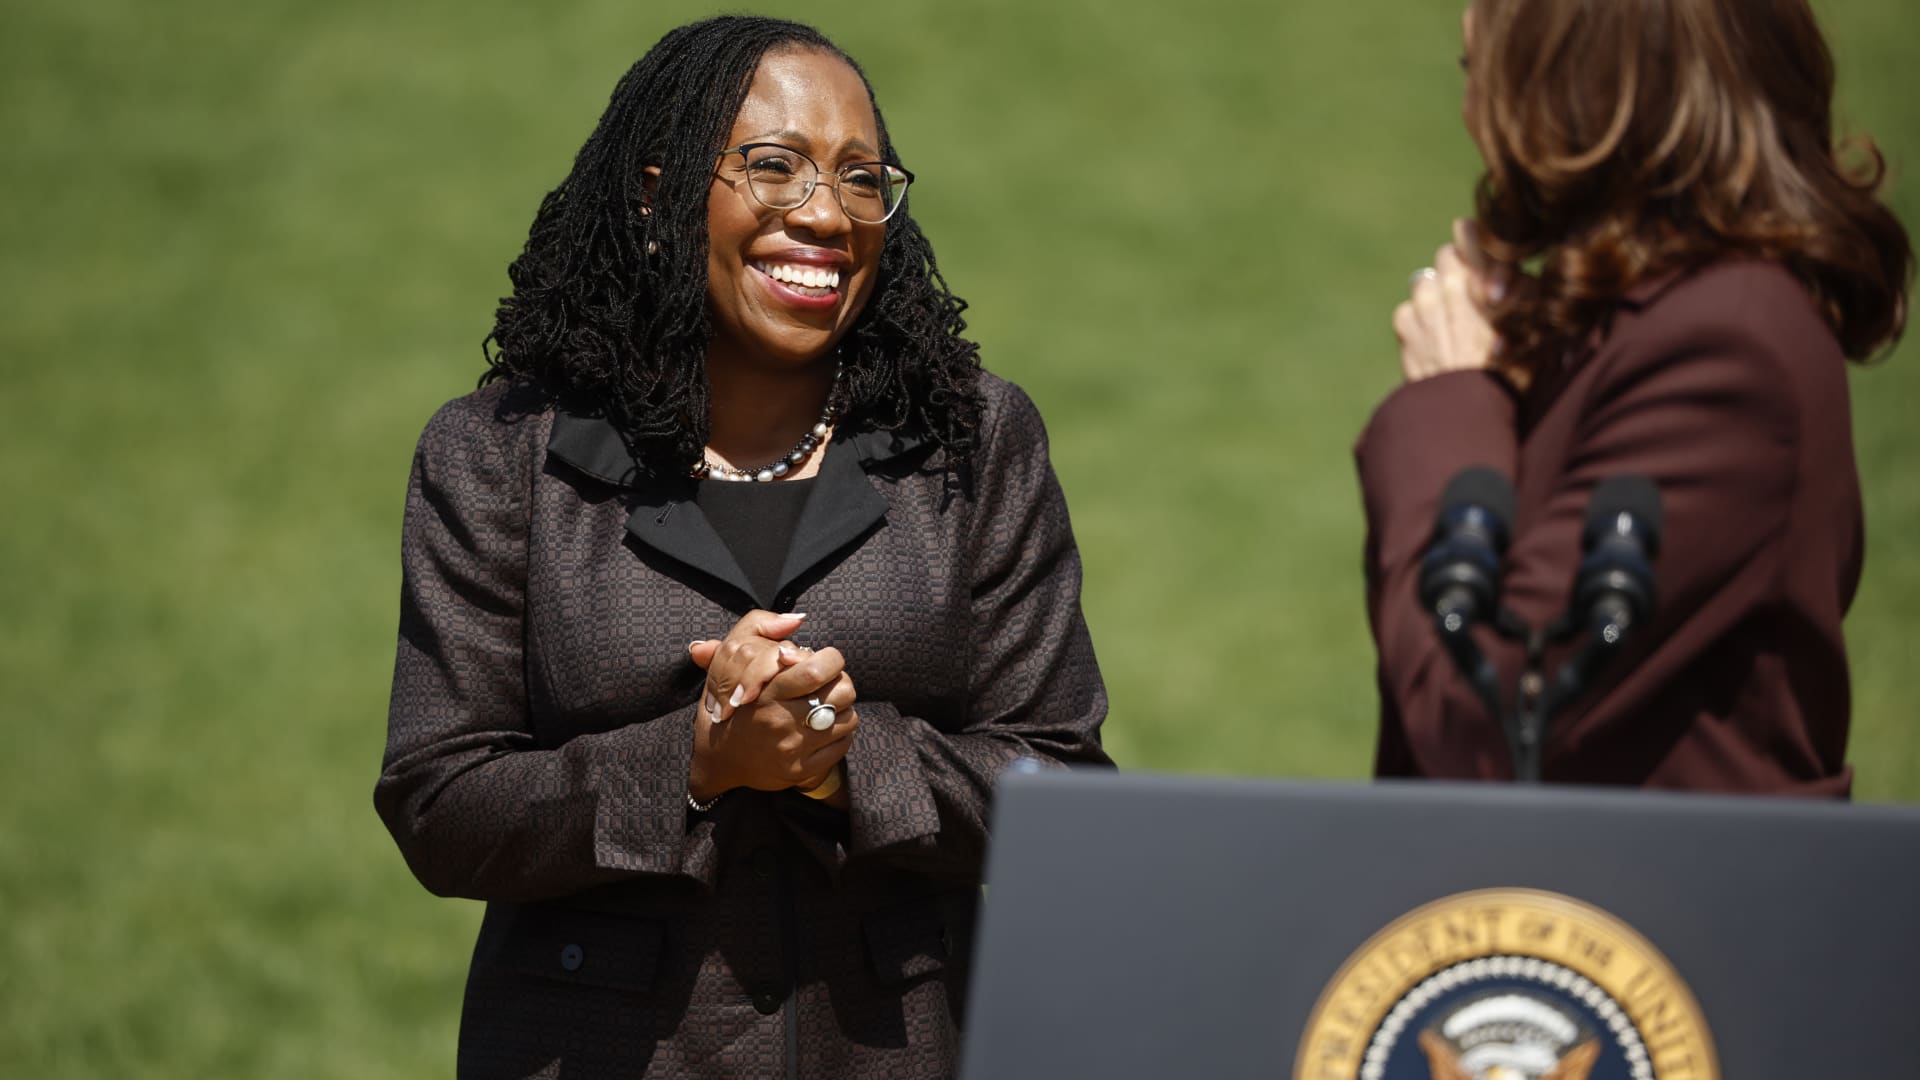 Judge Ketanji Brown Jackson smiles as Vice President Kamala Harris speaks at an event celebrating her confirmation to the U.S. Supreme Court on the South Lawn of the White House on April 8, 2022 in Washington, DC.